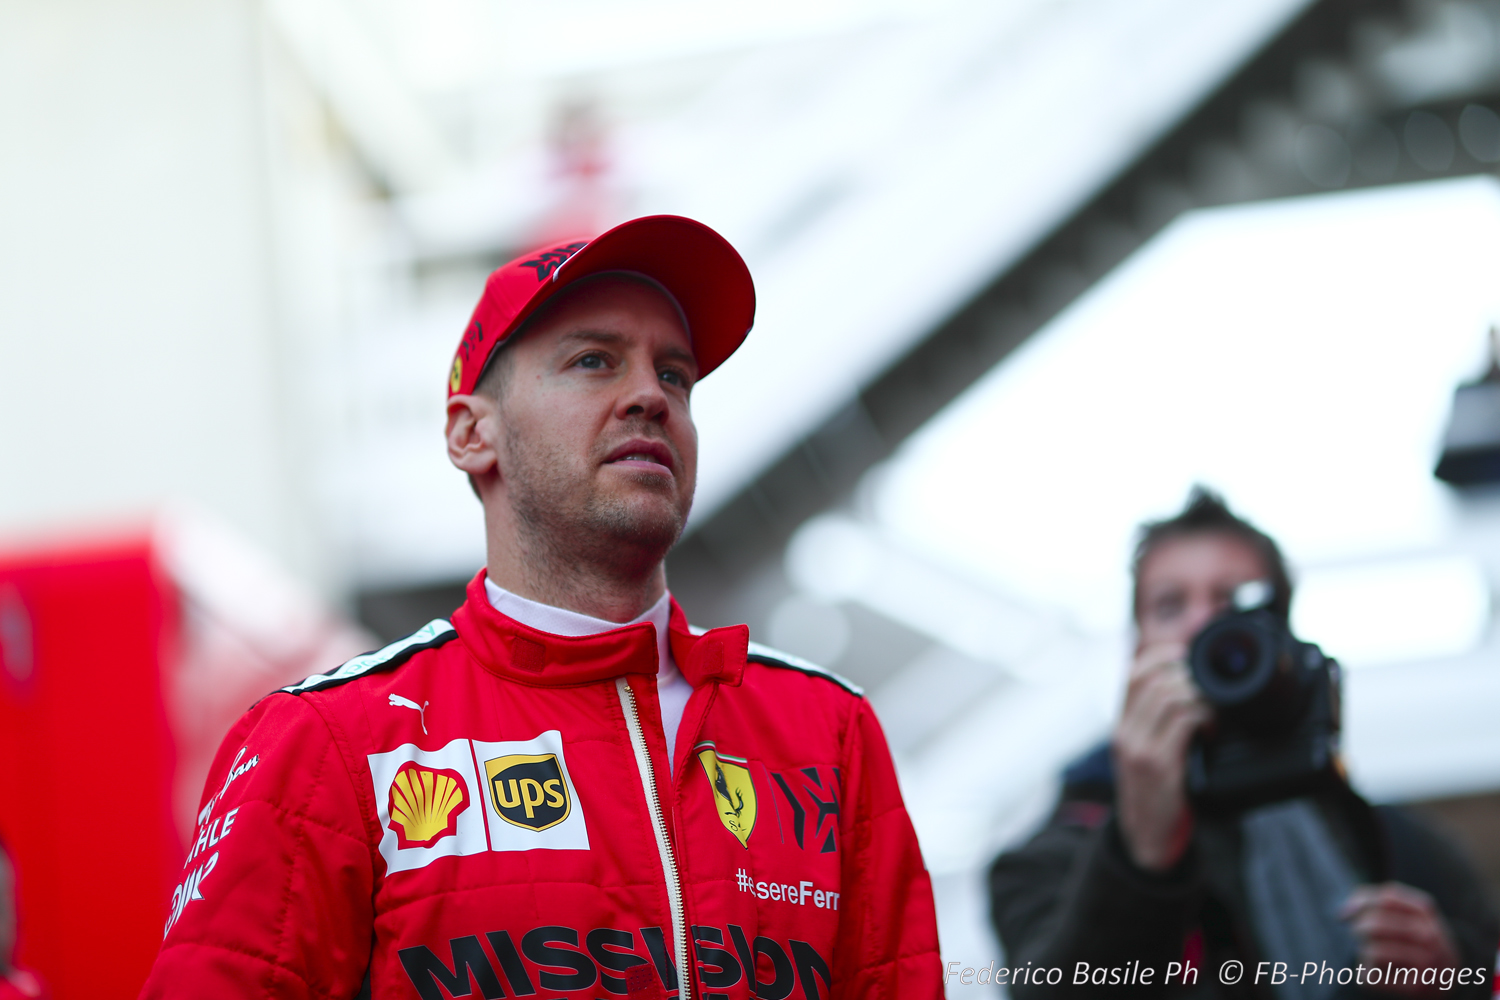 Given his recent performance, some doubt Sebastian Vettel will race to even 35